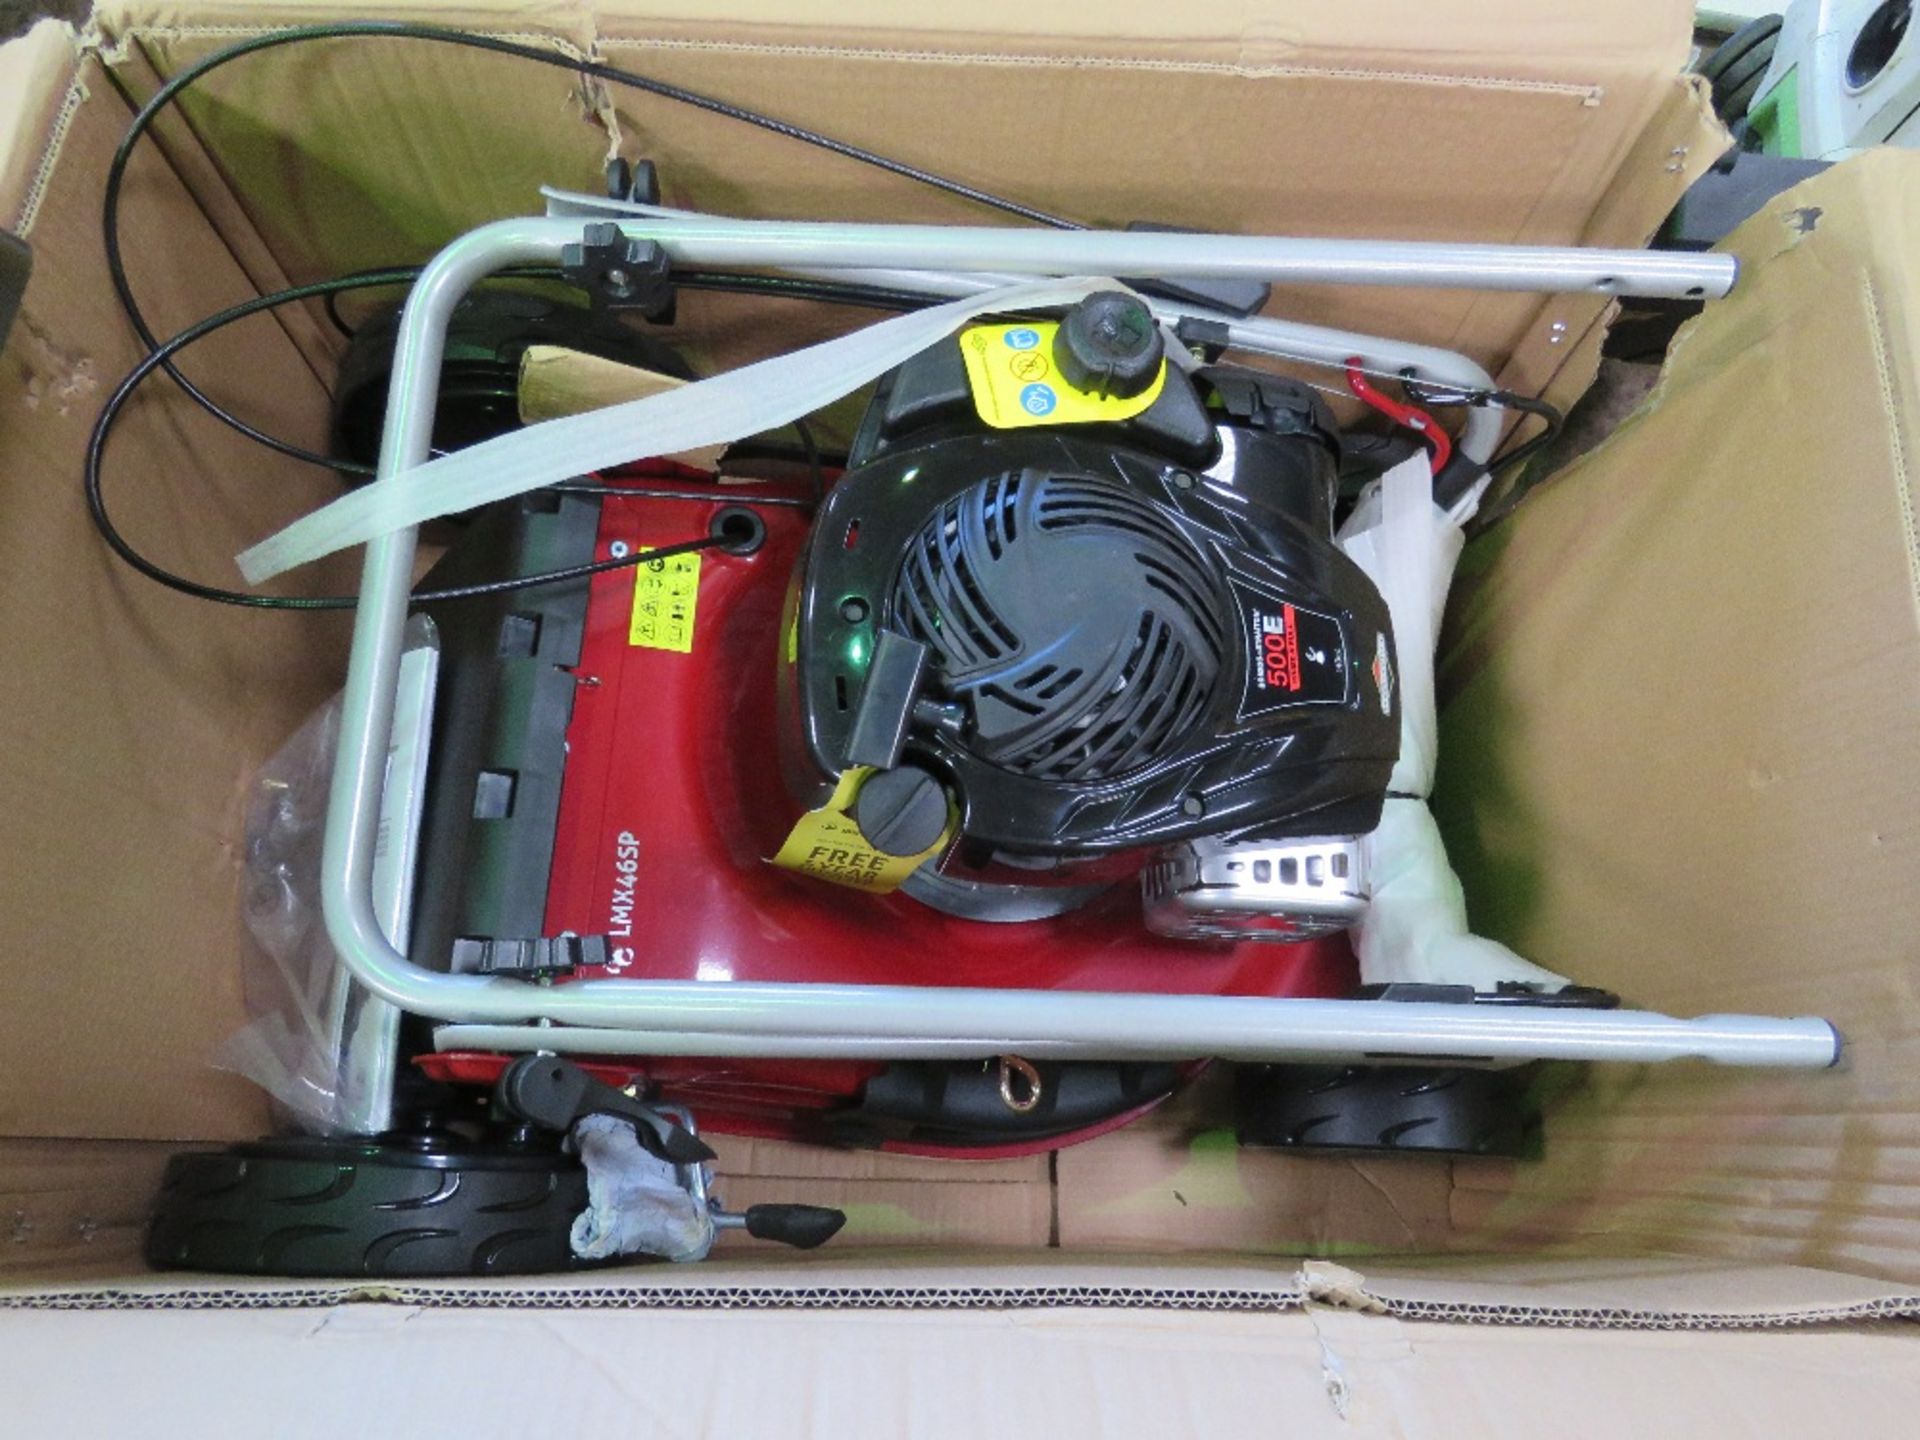 GARDENCARE LMX46SP PETROL ENGINED MOWER, UNUSED IN A BOX. - Image 4 of 7